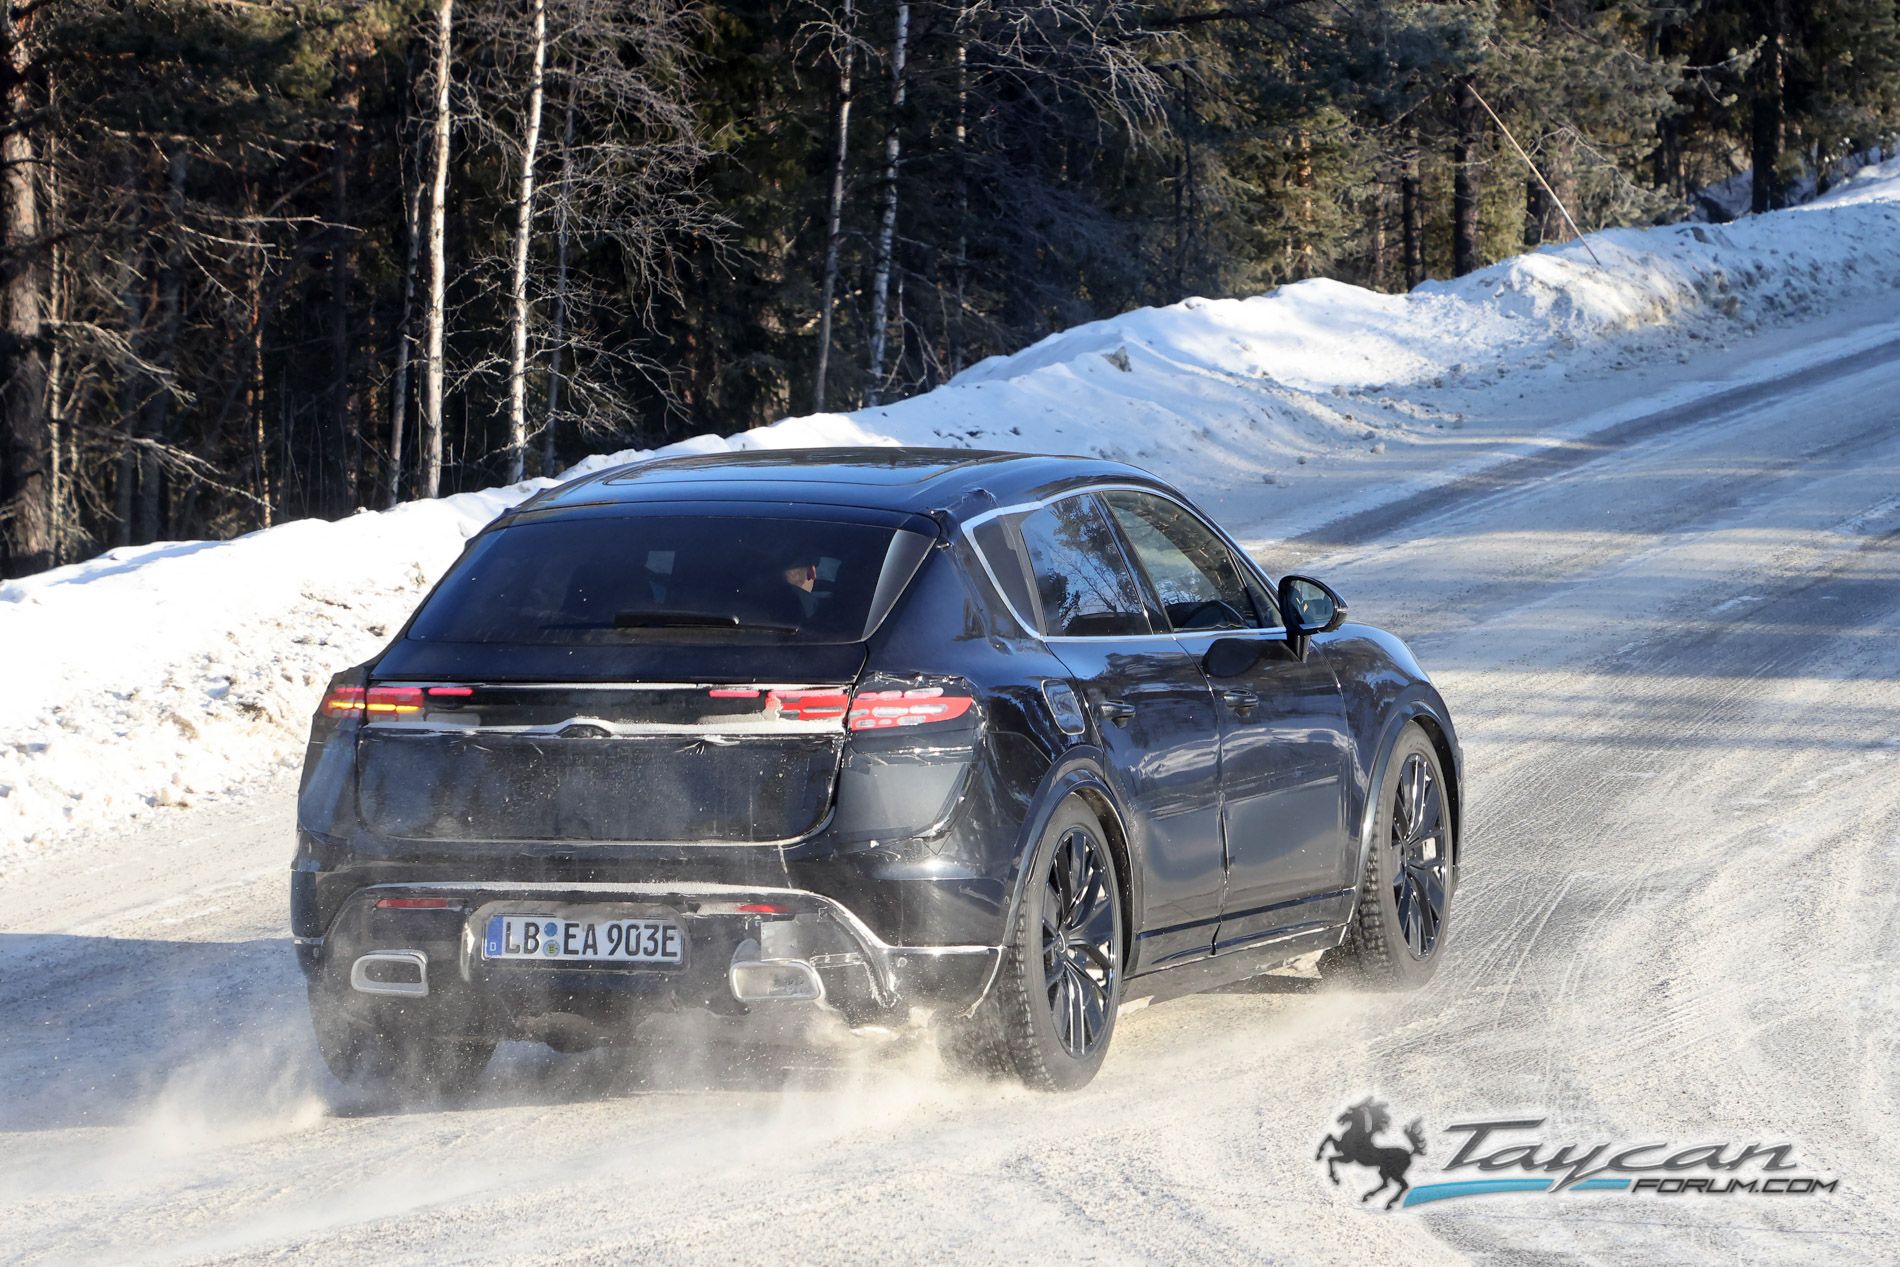 Macan EV Macan EV Interior Spied Uncovered! + Latest Cold Climate Testing Photos Porsche Macan 17